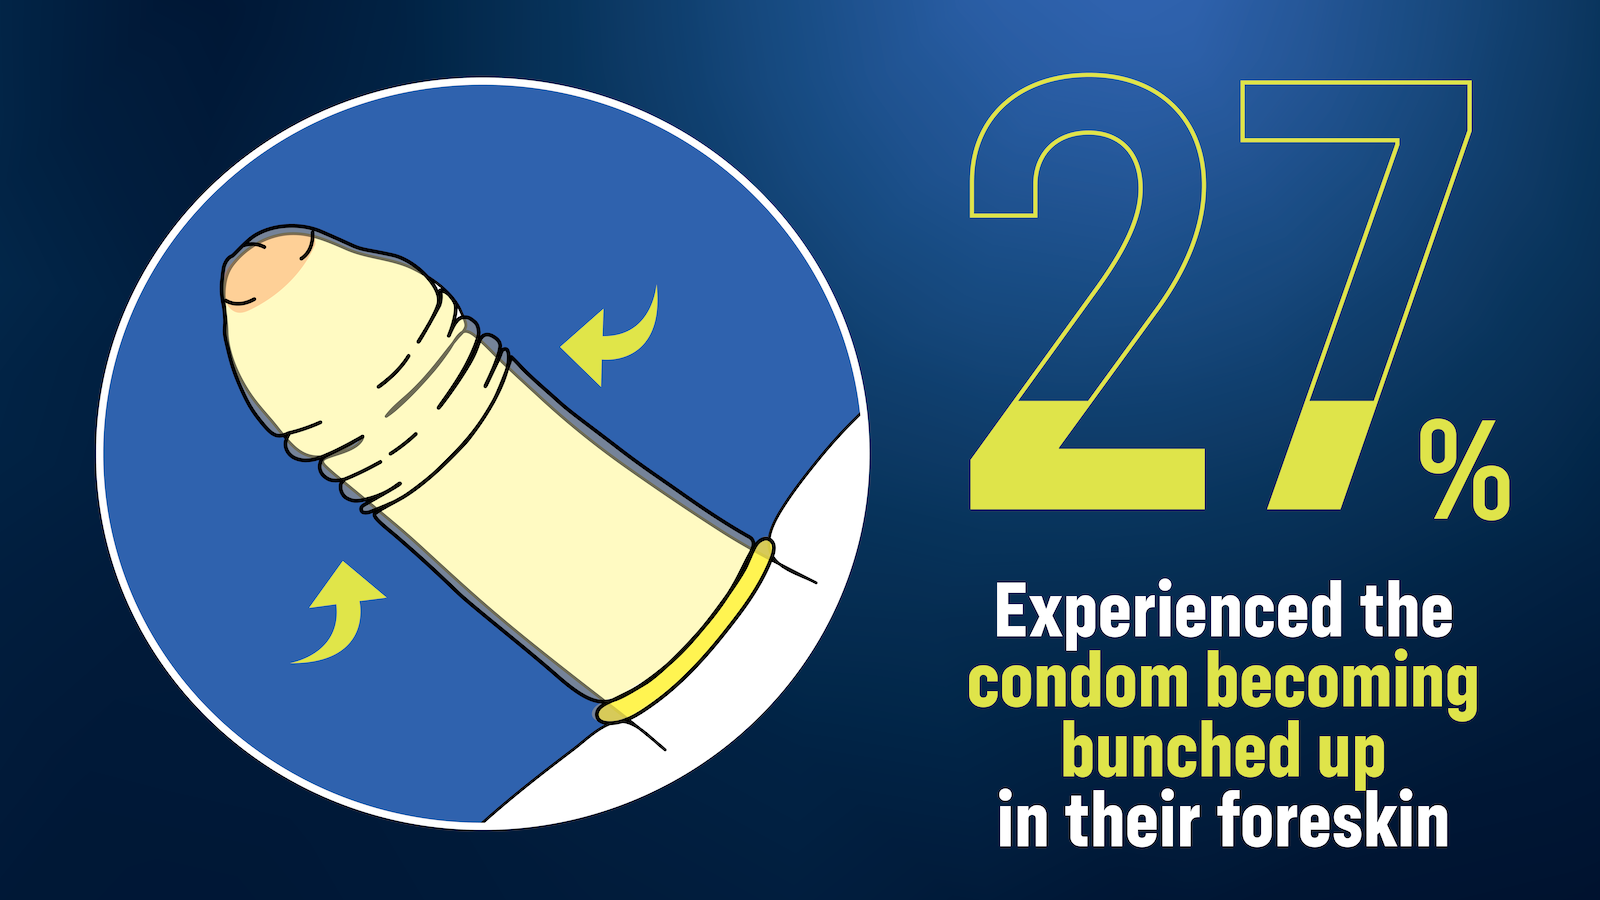 27% of people experience the condom bunched up